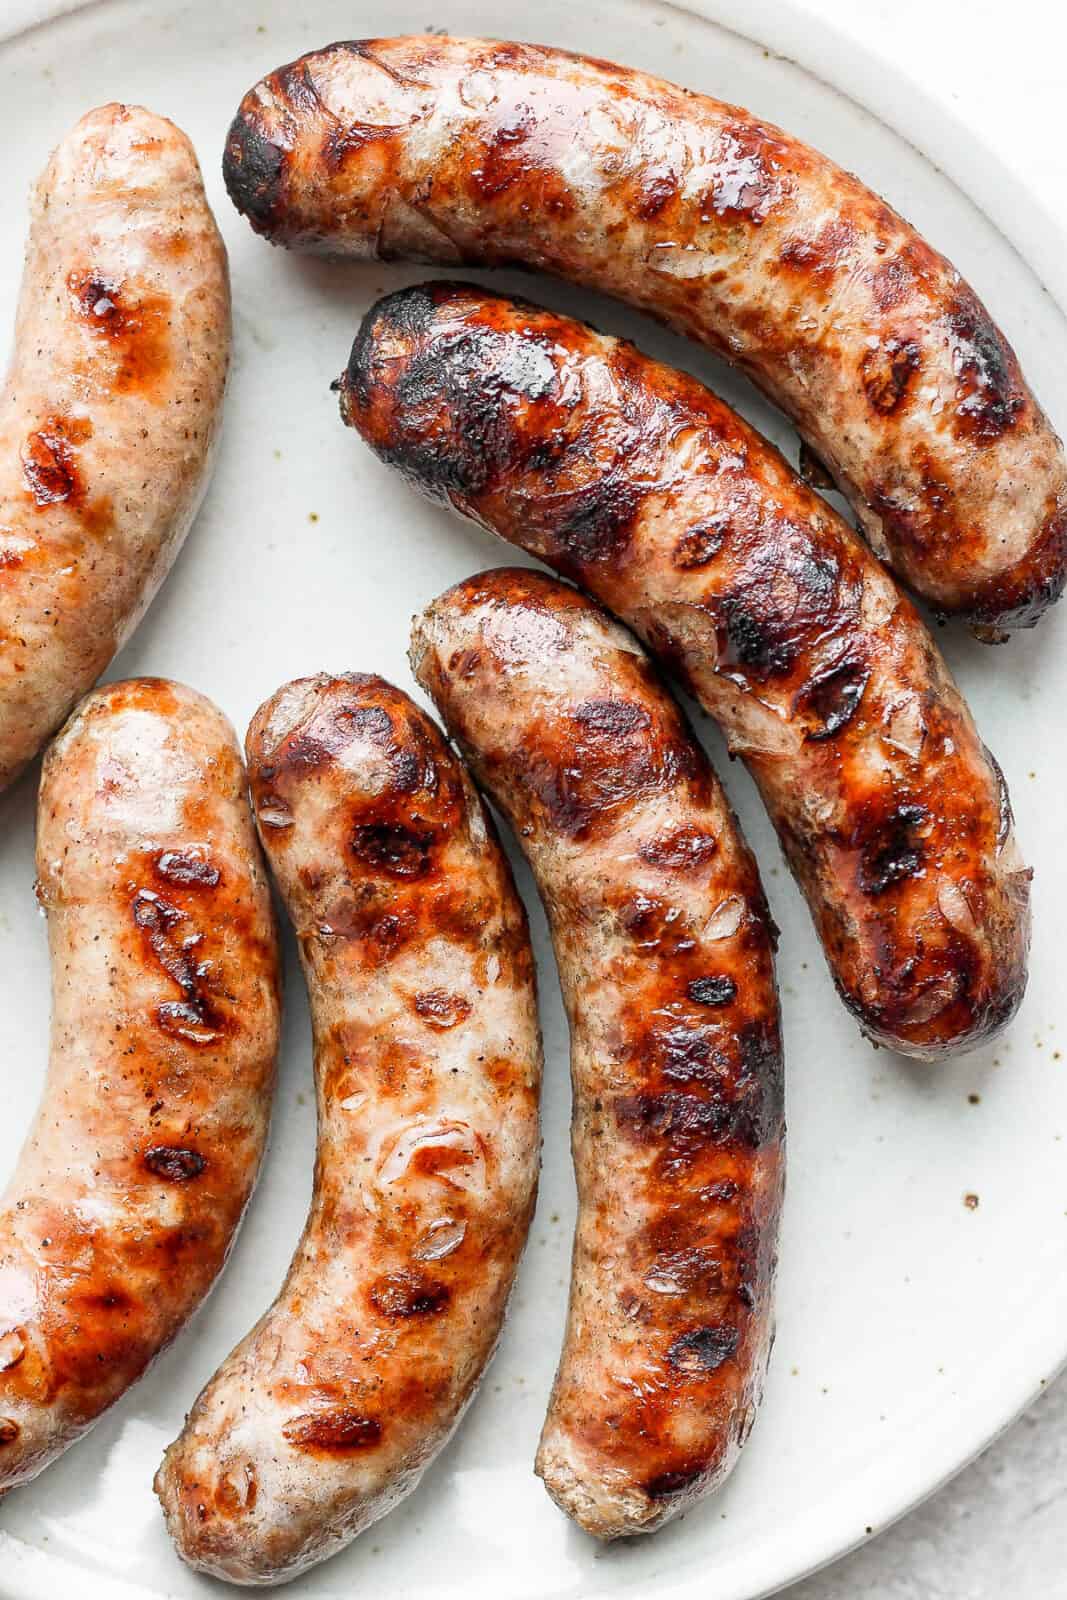 Beer brats on a plate.